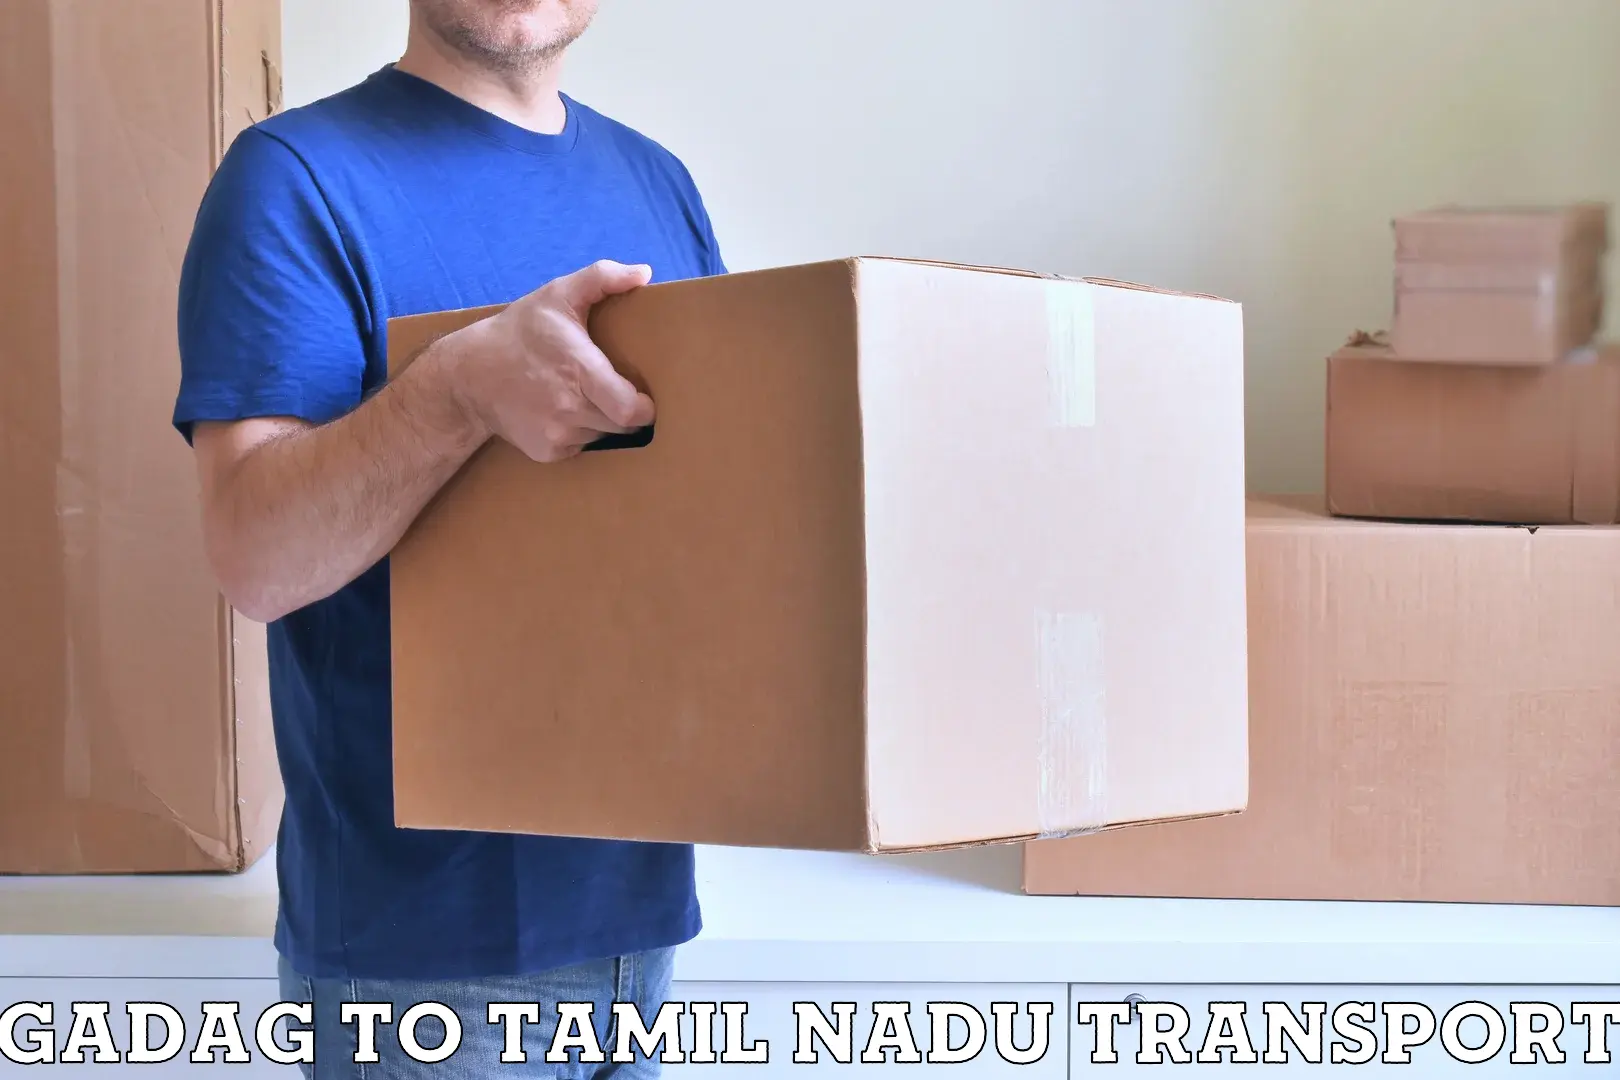 Shipping services Gadag to Vellore Institute of Technology